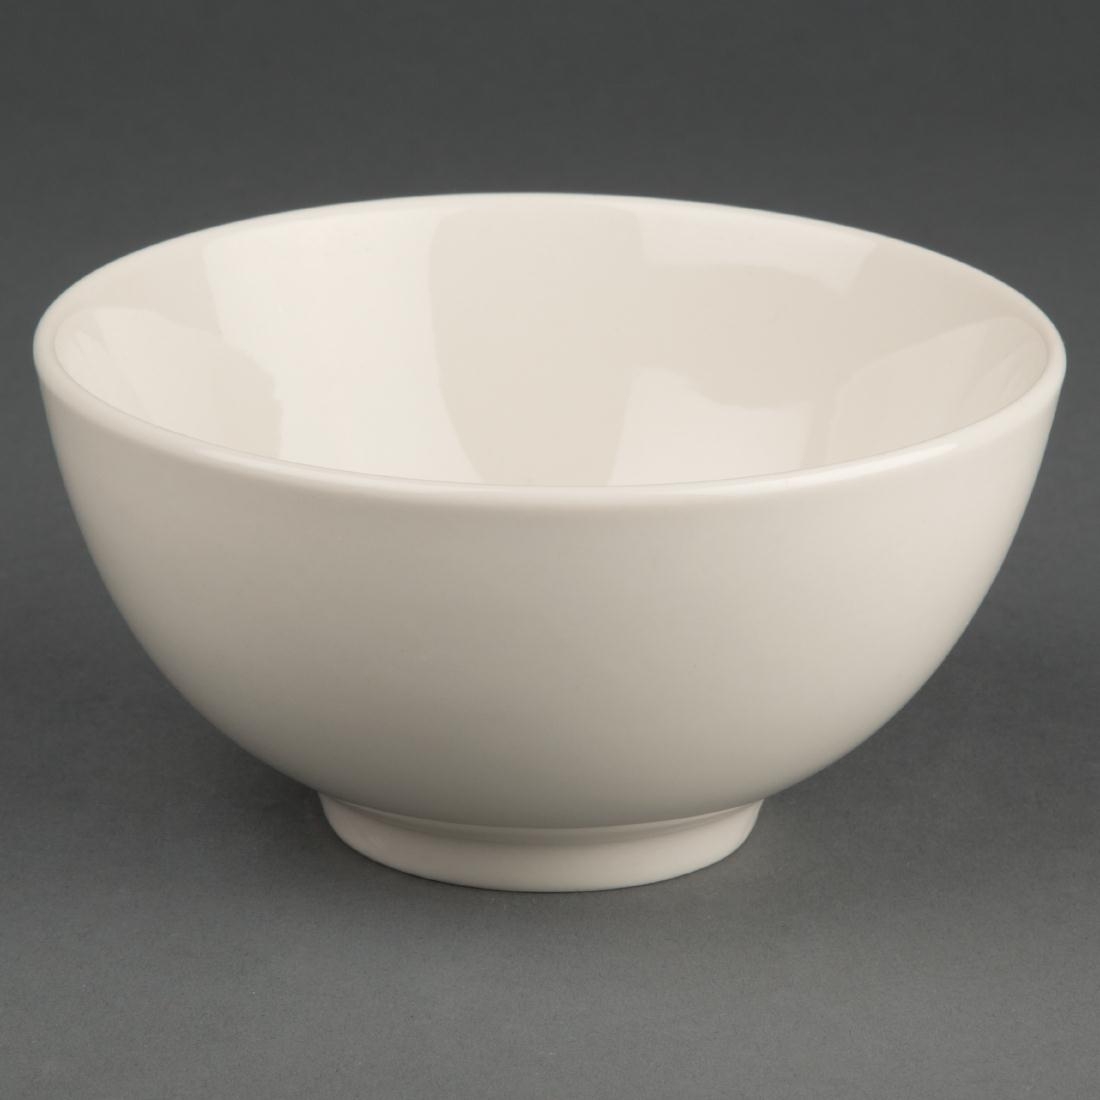 Olympia Ivory Rice Bowls 130mm